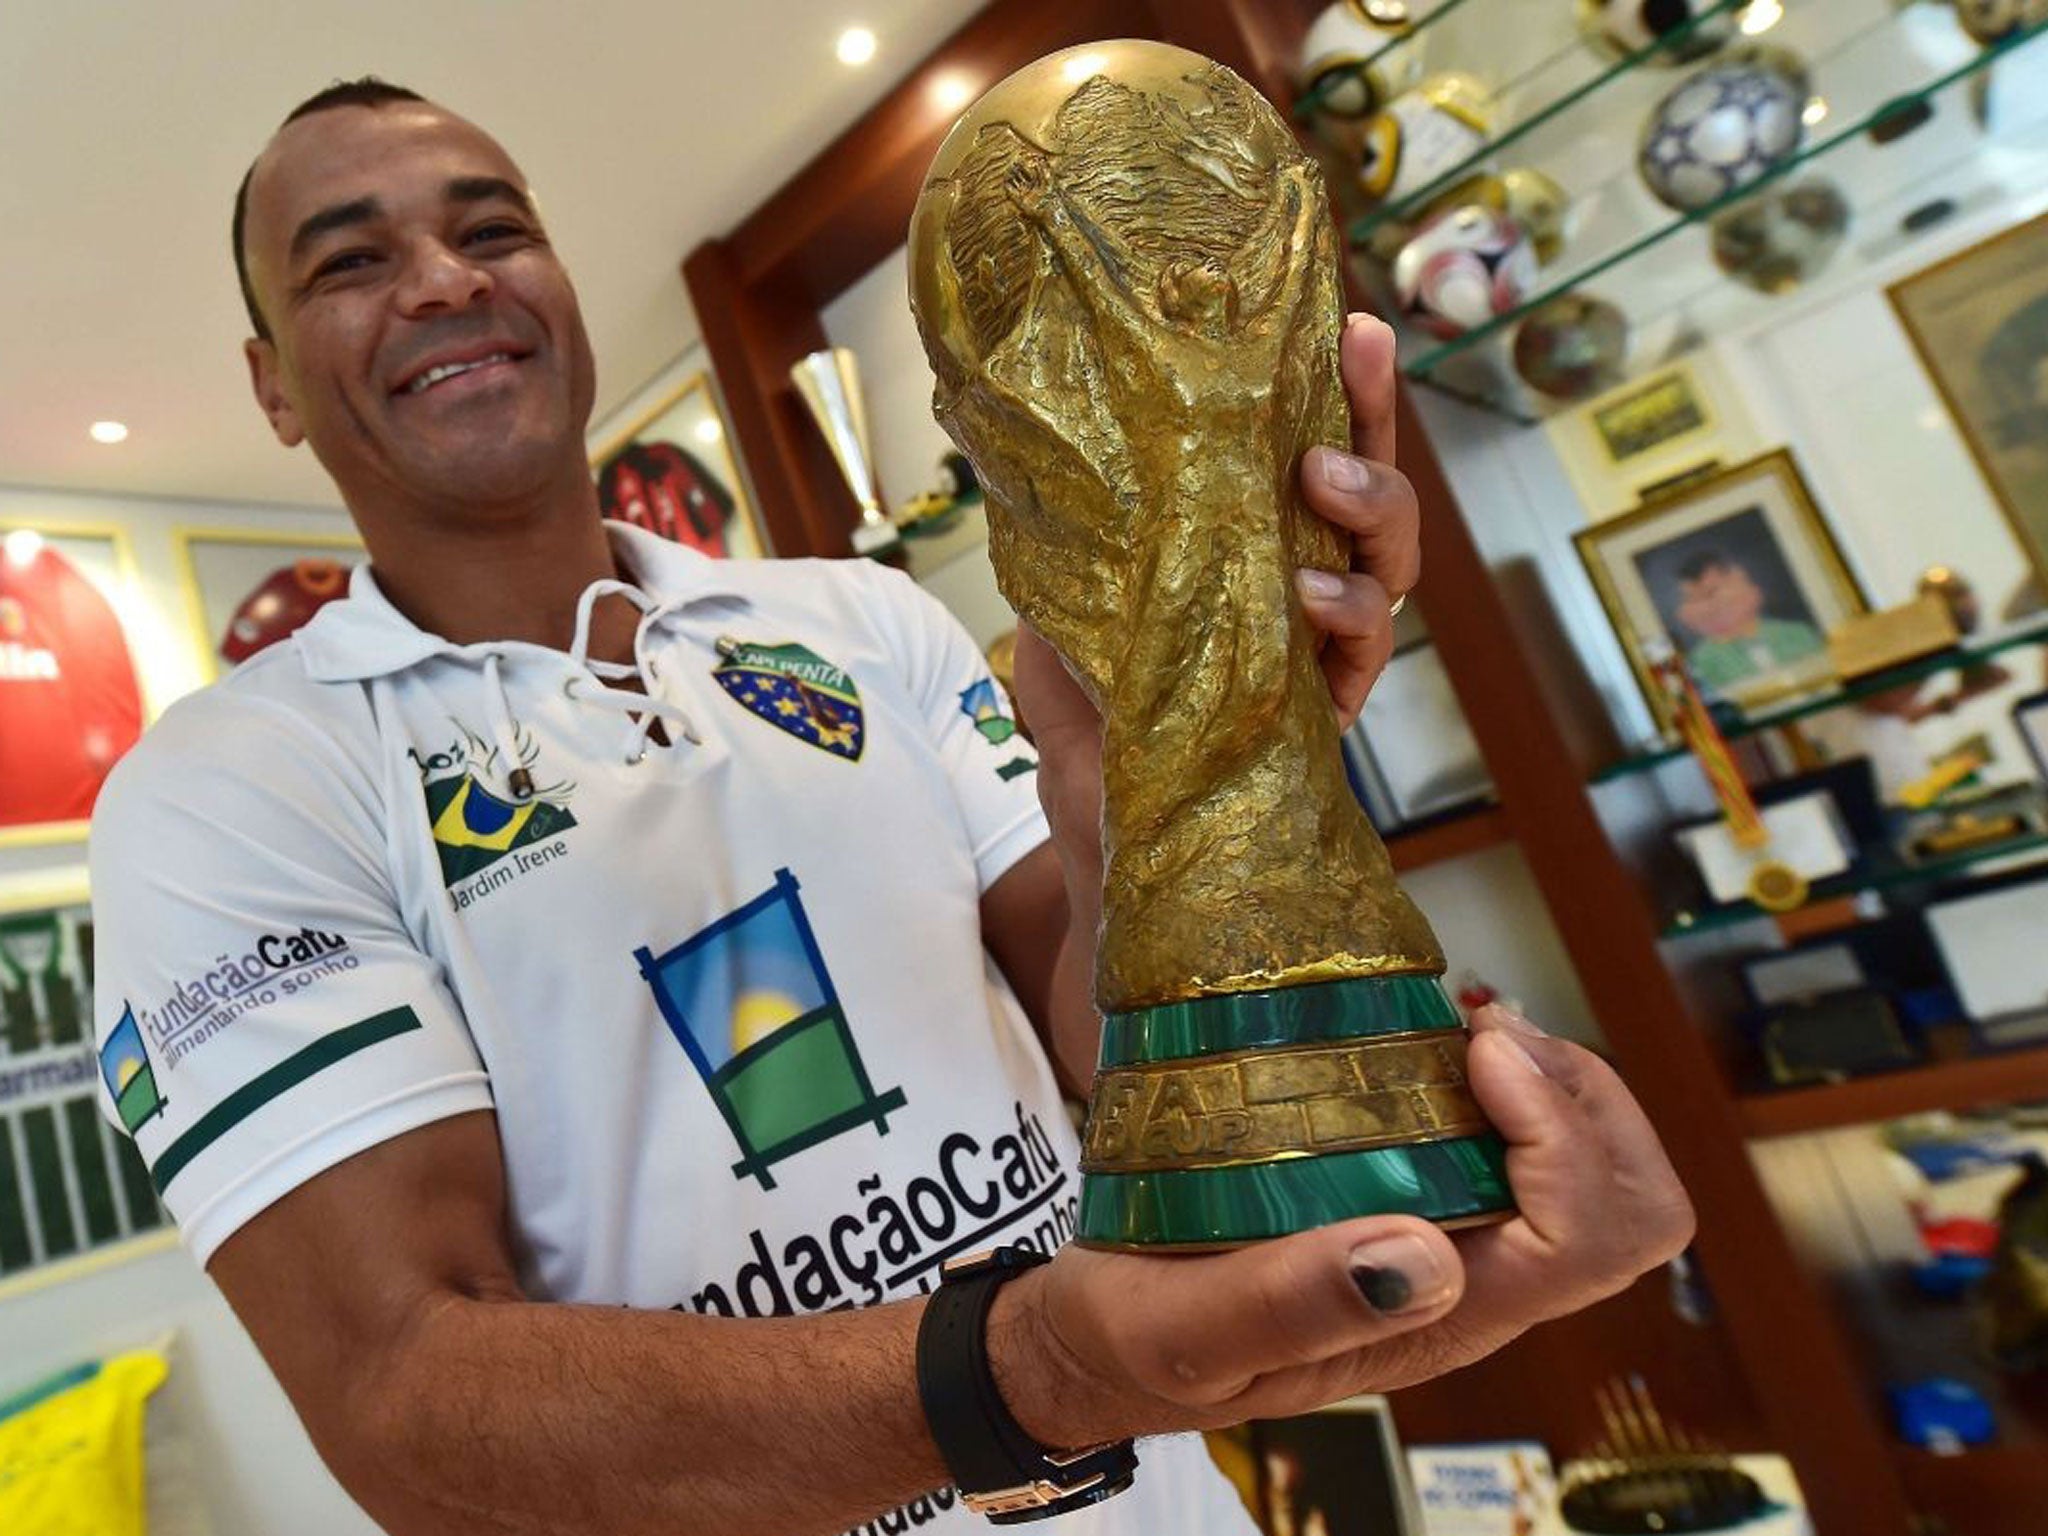 Cafu poses with the replica of the World Cup trophy he had made after leading Brazil to victory in the 2002 tournament in Japan and South Korea